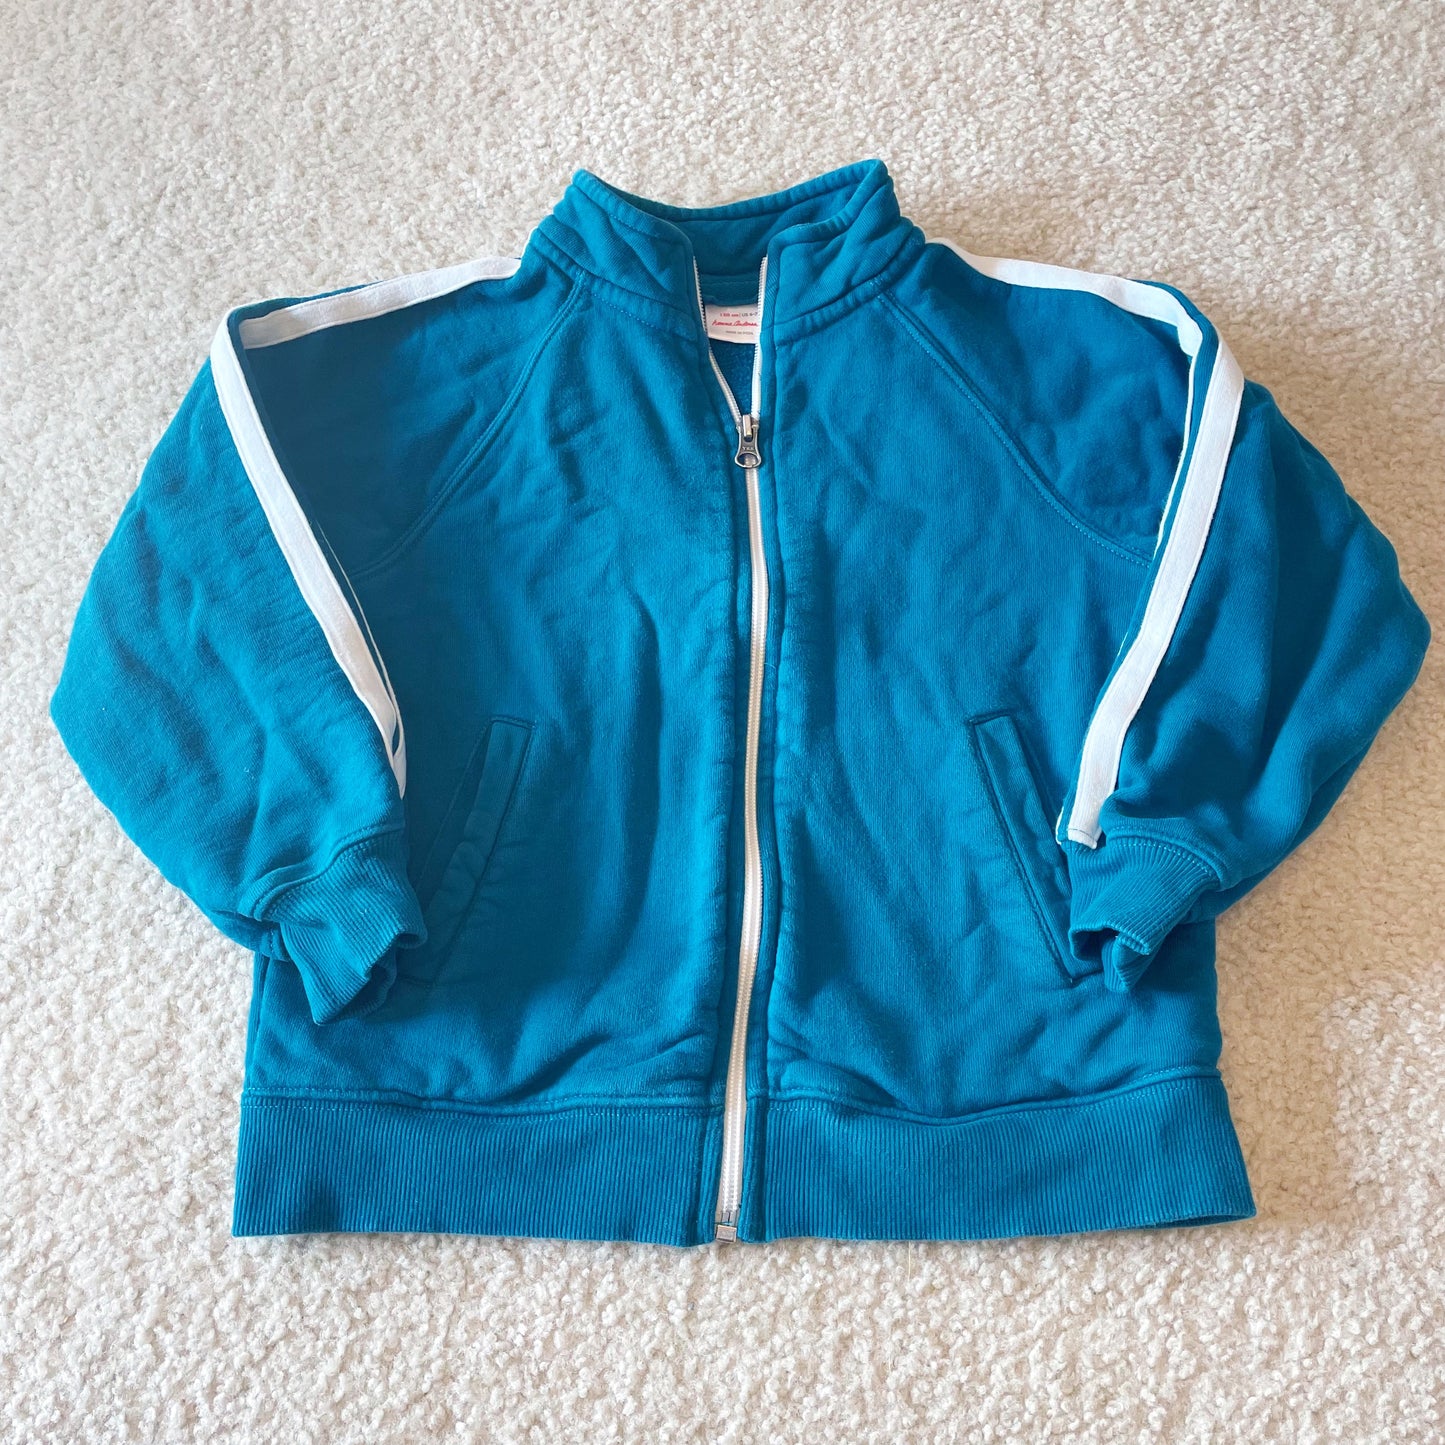 Boys Size 120 / 6-7 Hanna Andersson Teal Zip Up Track Jacket